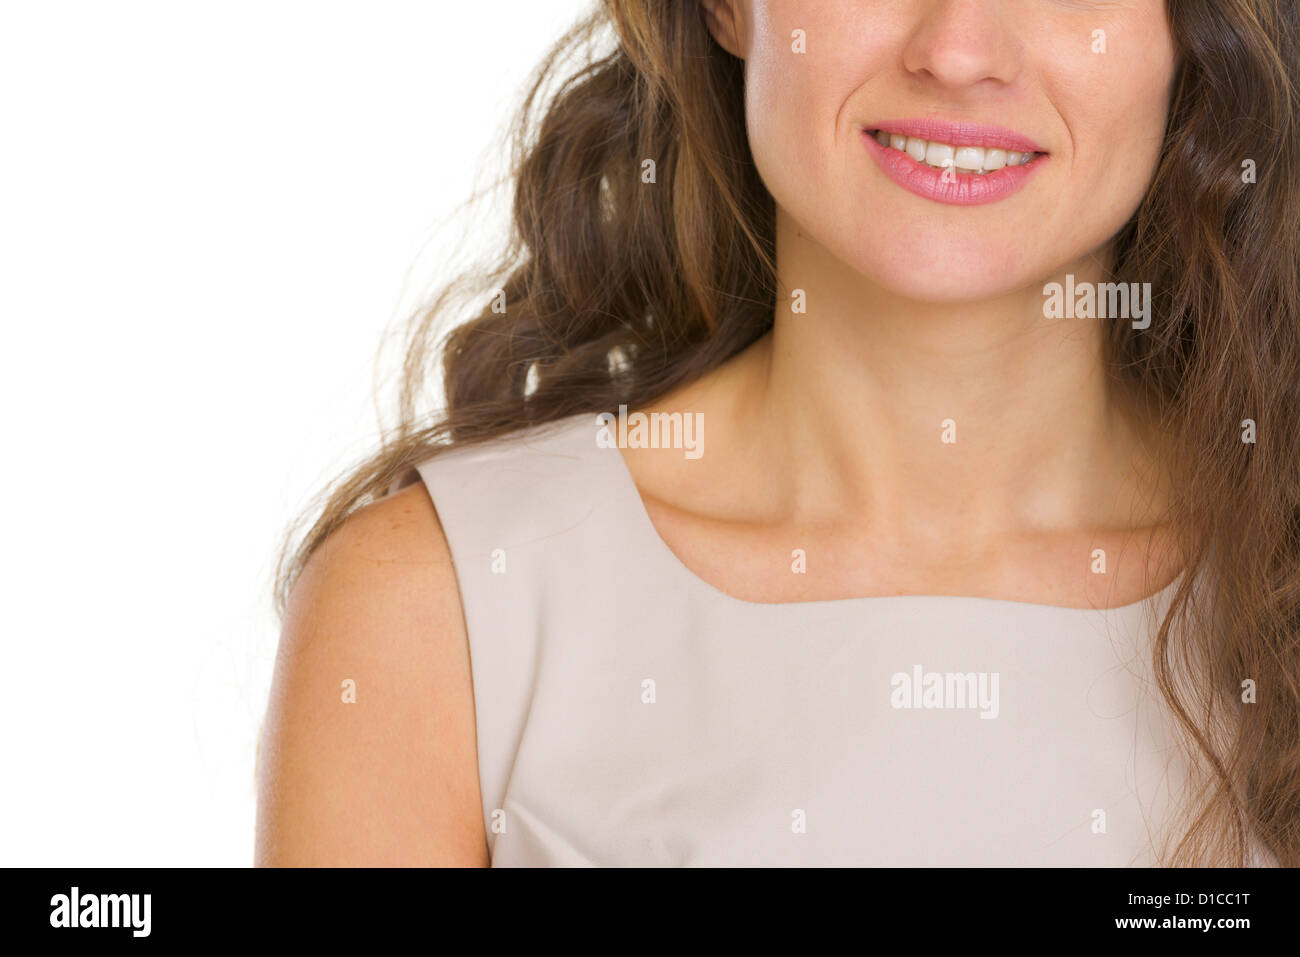 Closeup on young woman Stock Photo